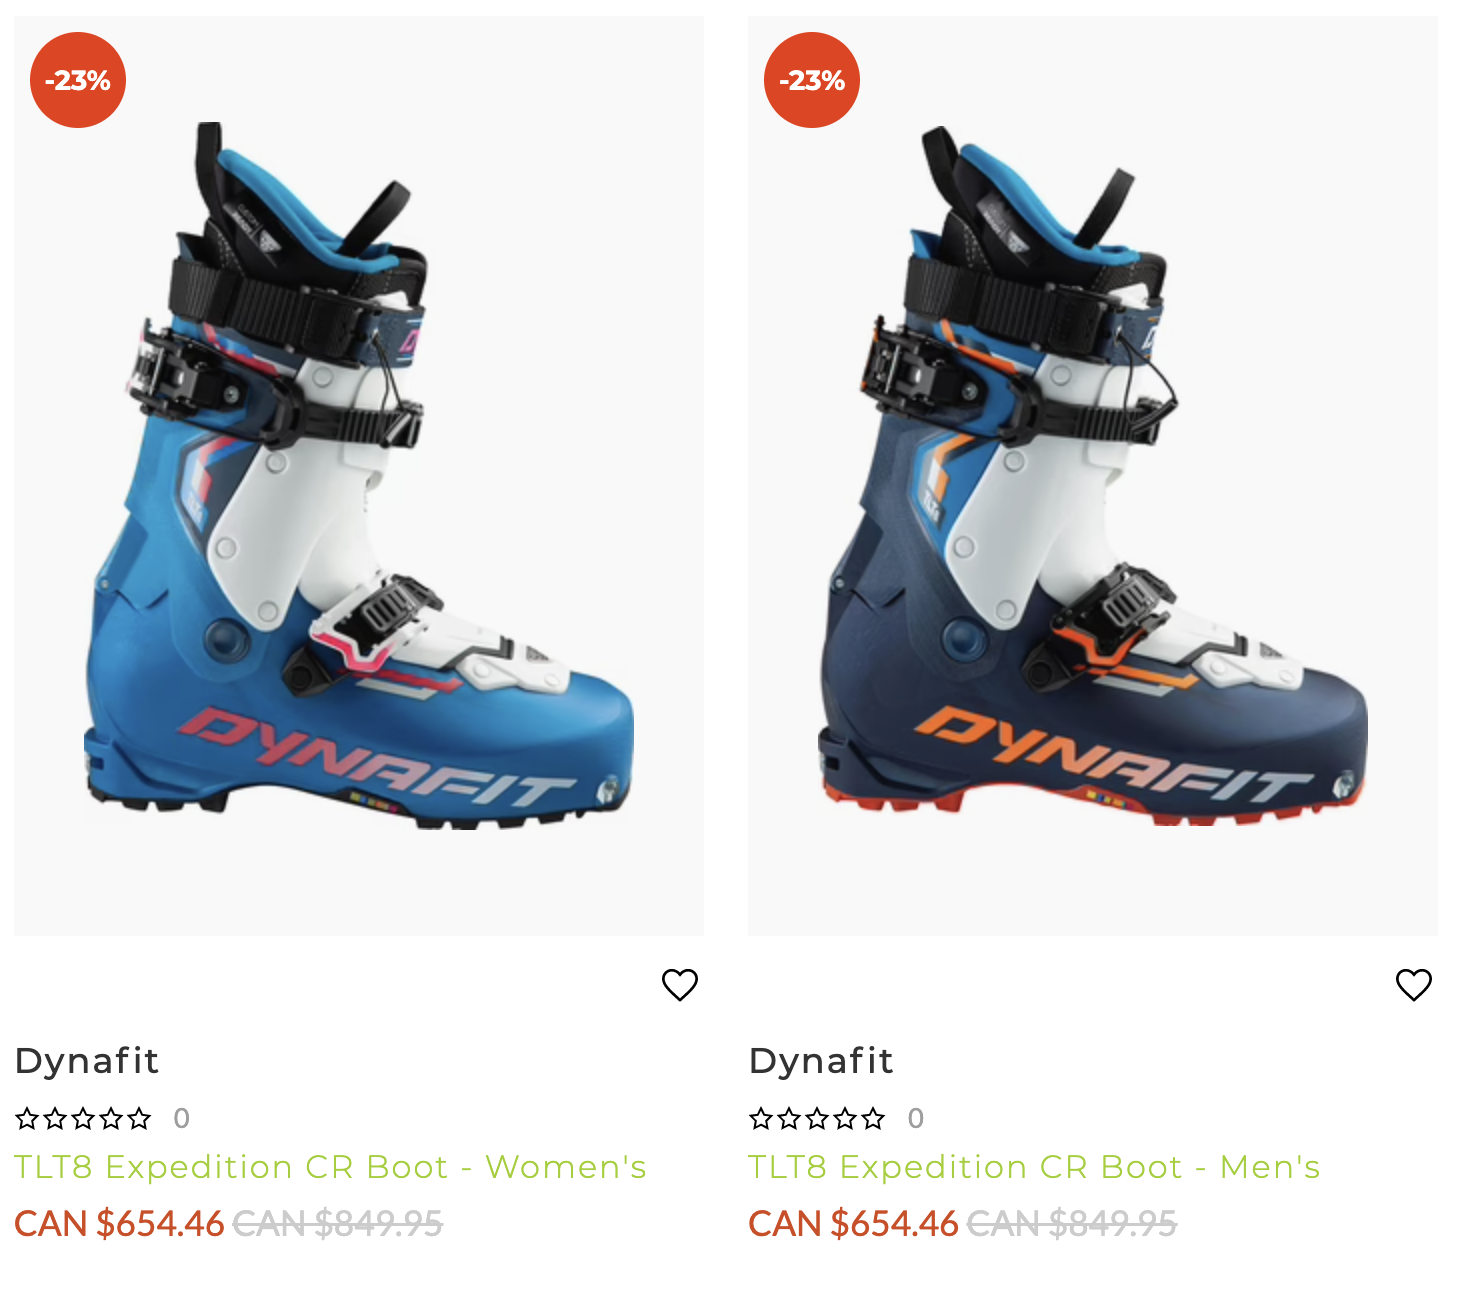 Missed Black Friday? Backcountry Ski Sales in Canada Right Now.